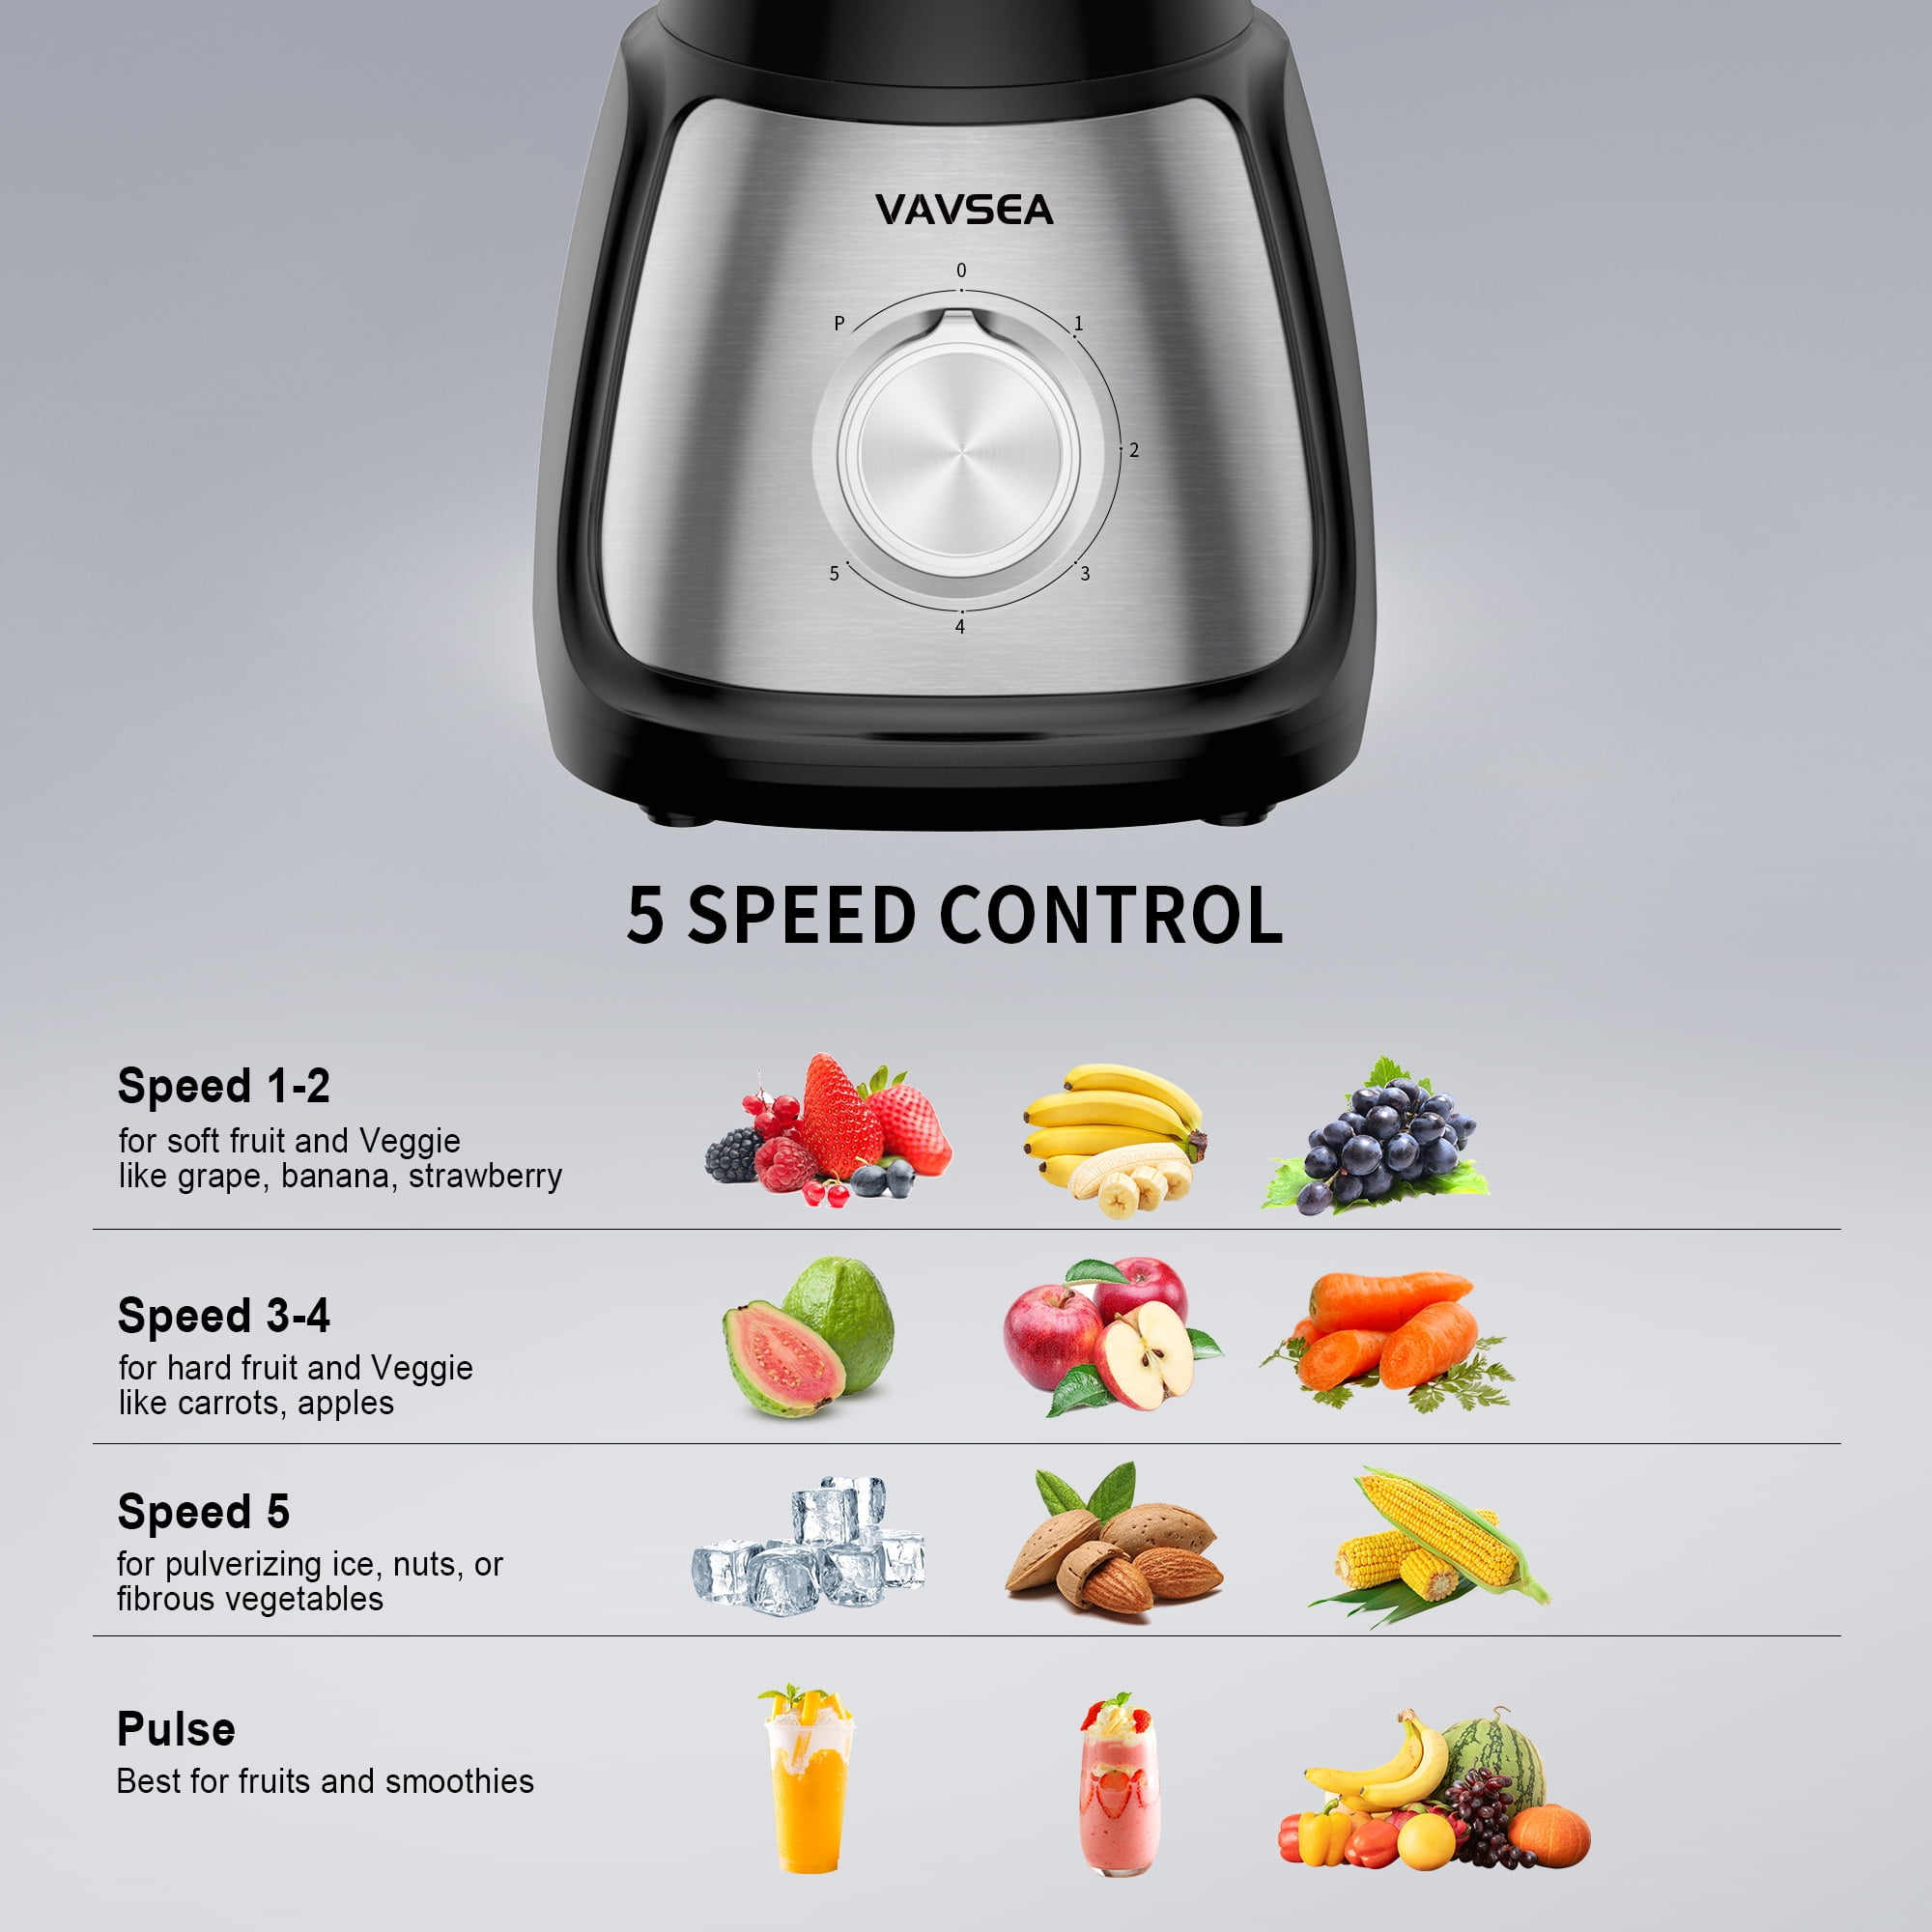 VAVSEA Portable Blender, Personal Blender for Shakes and Smoothies